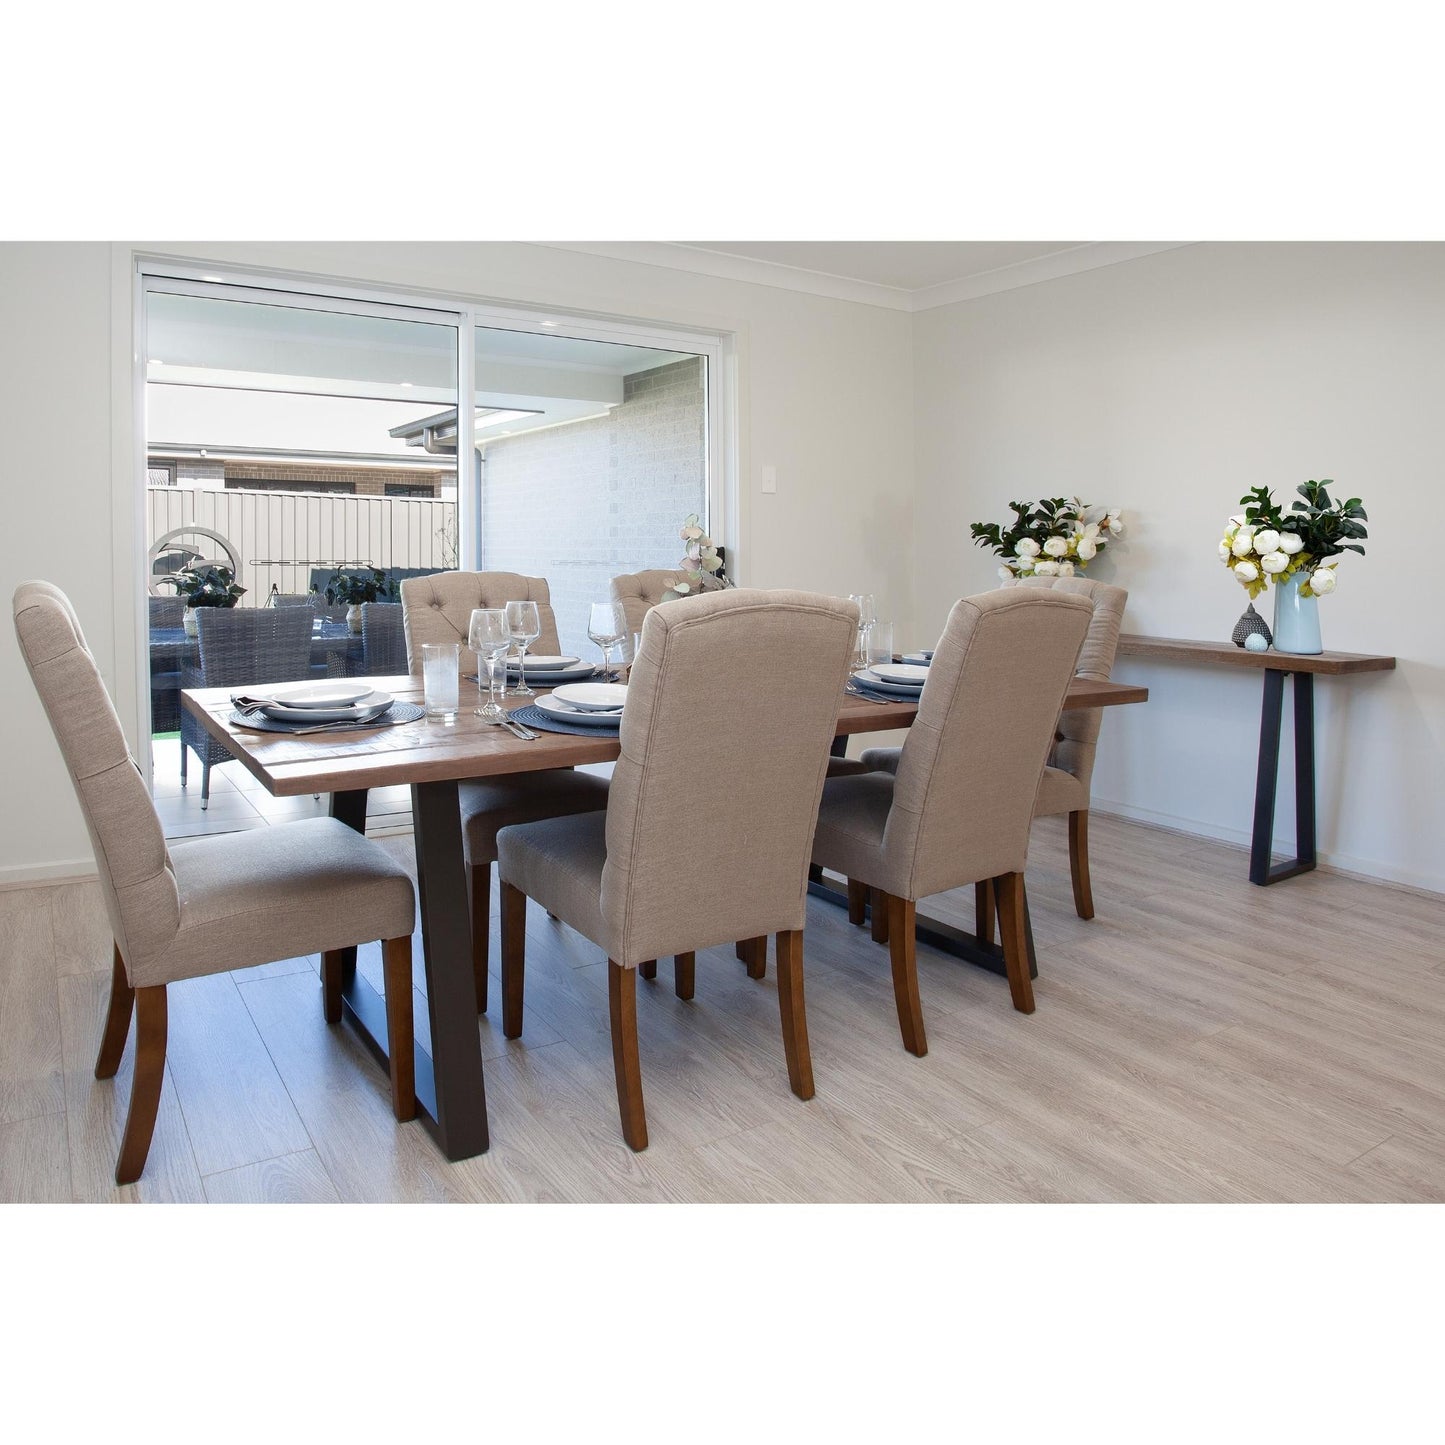 Begonia Live Edge Solid Mango Wood Dining Table 180cm